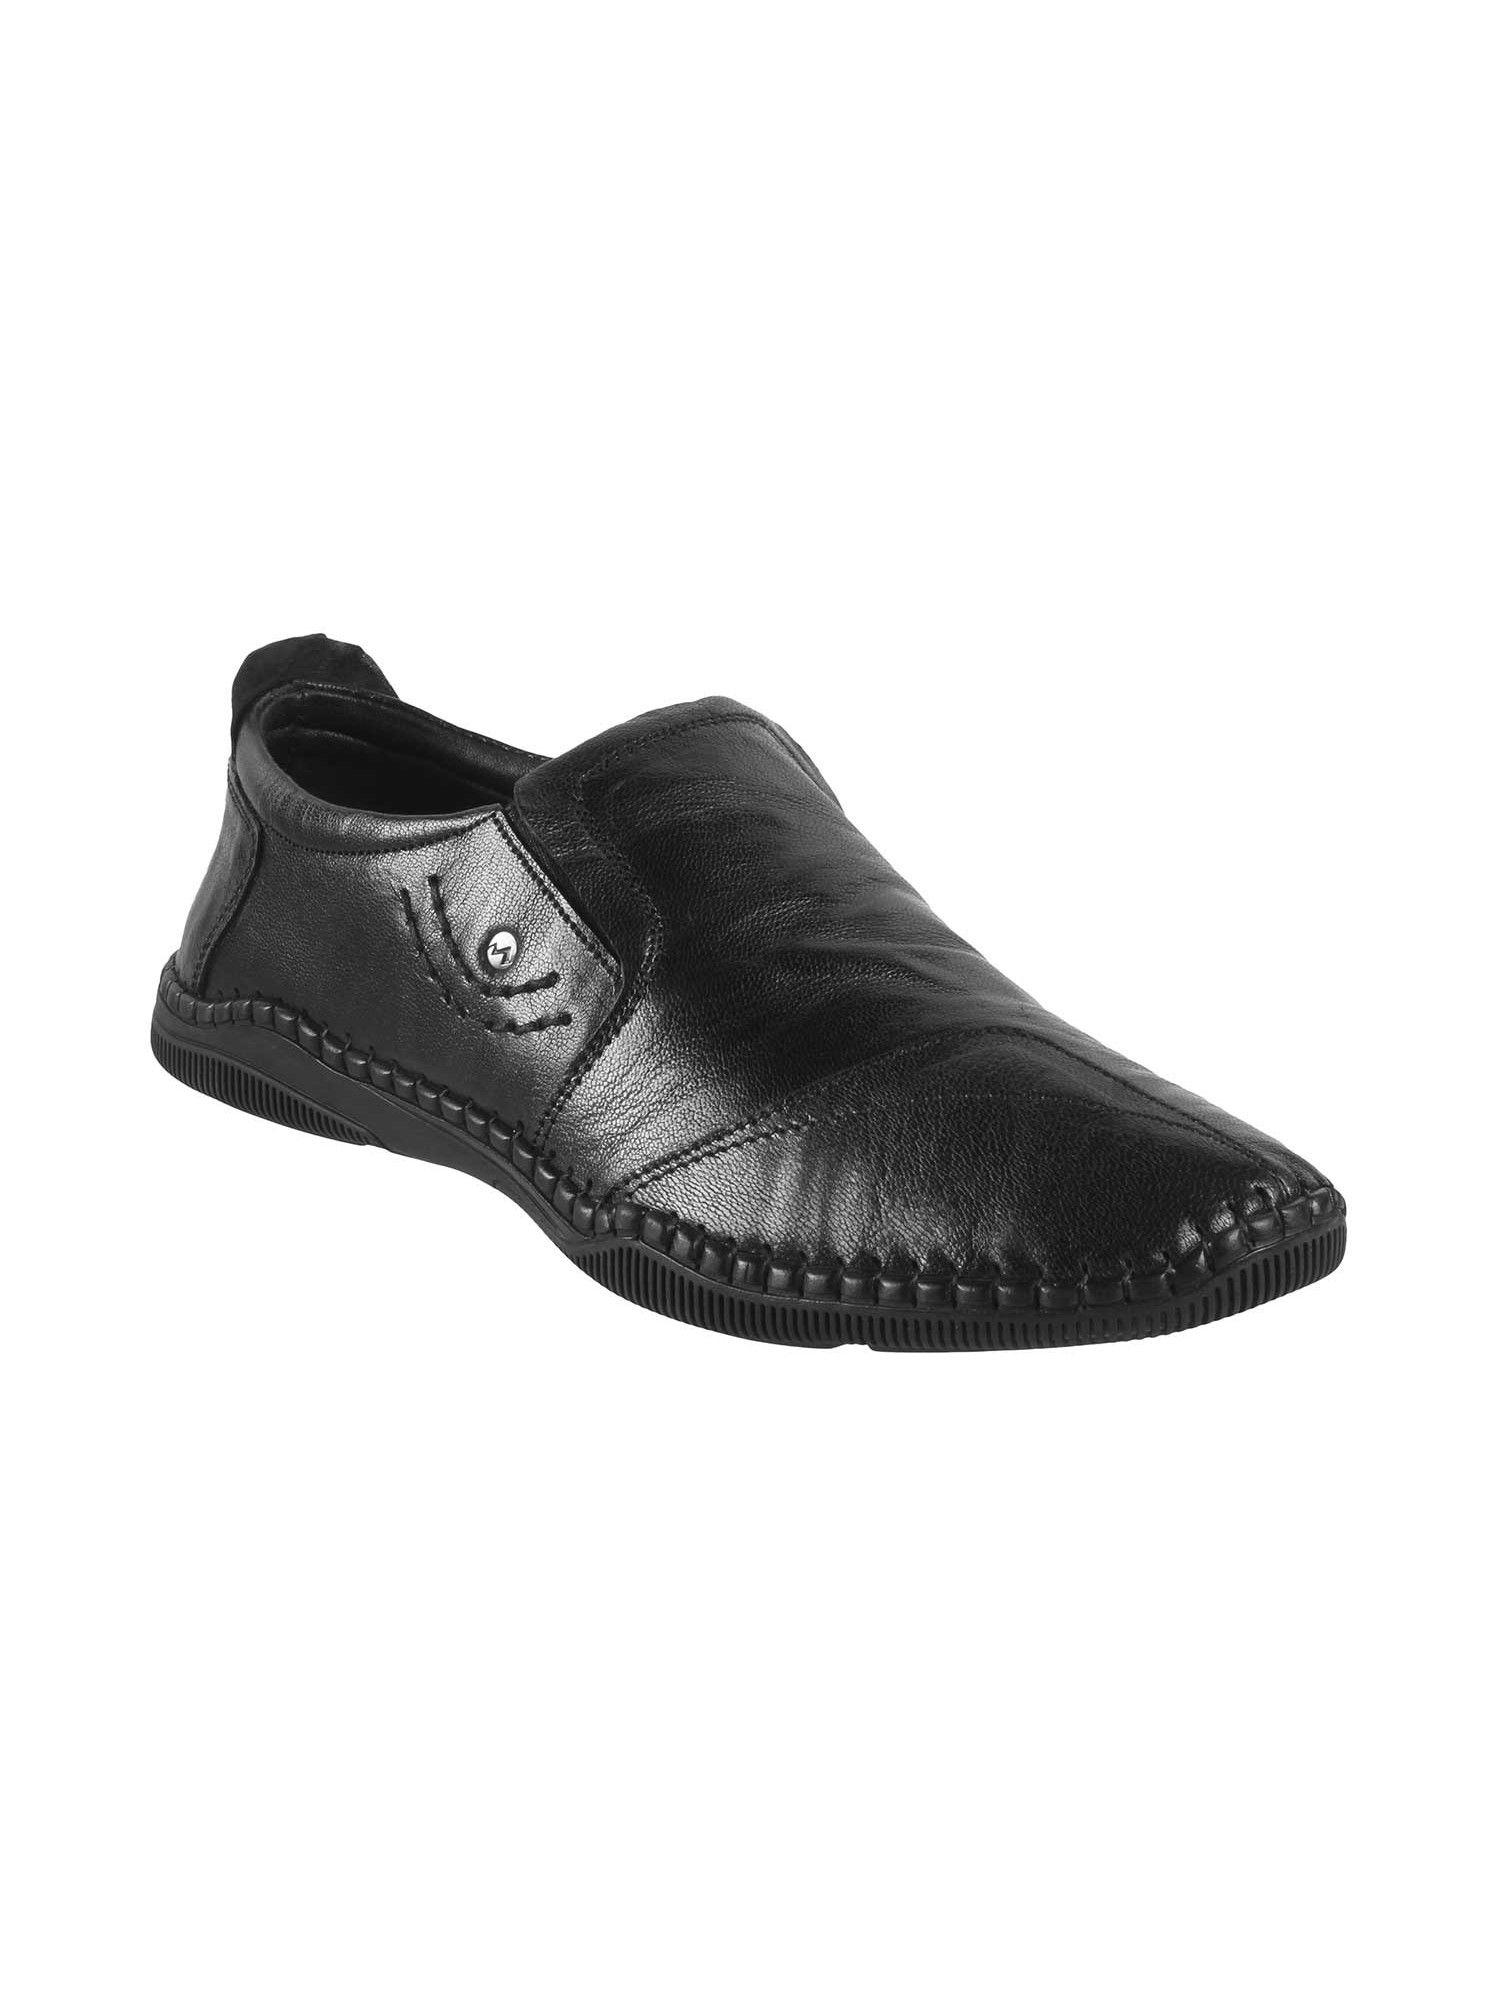 mens black leather textured casual shoes